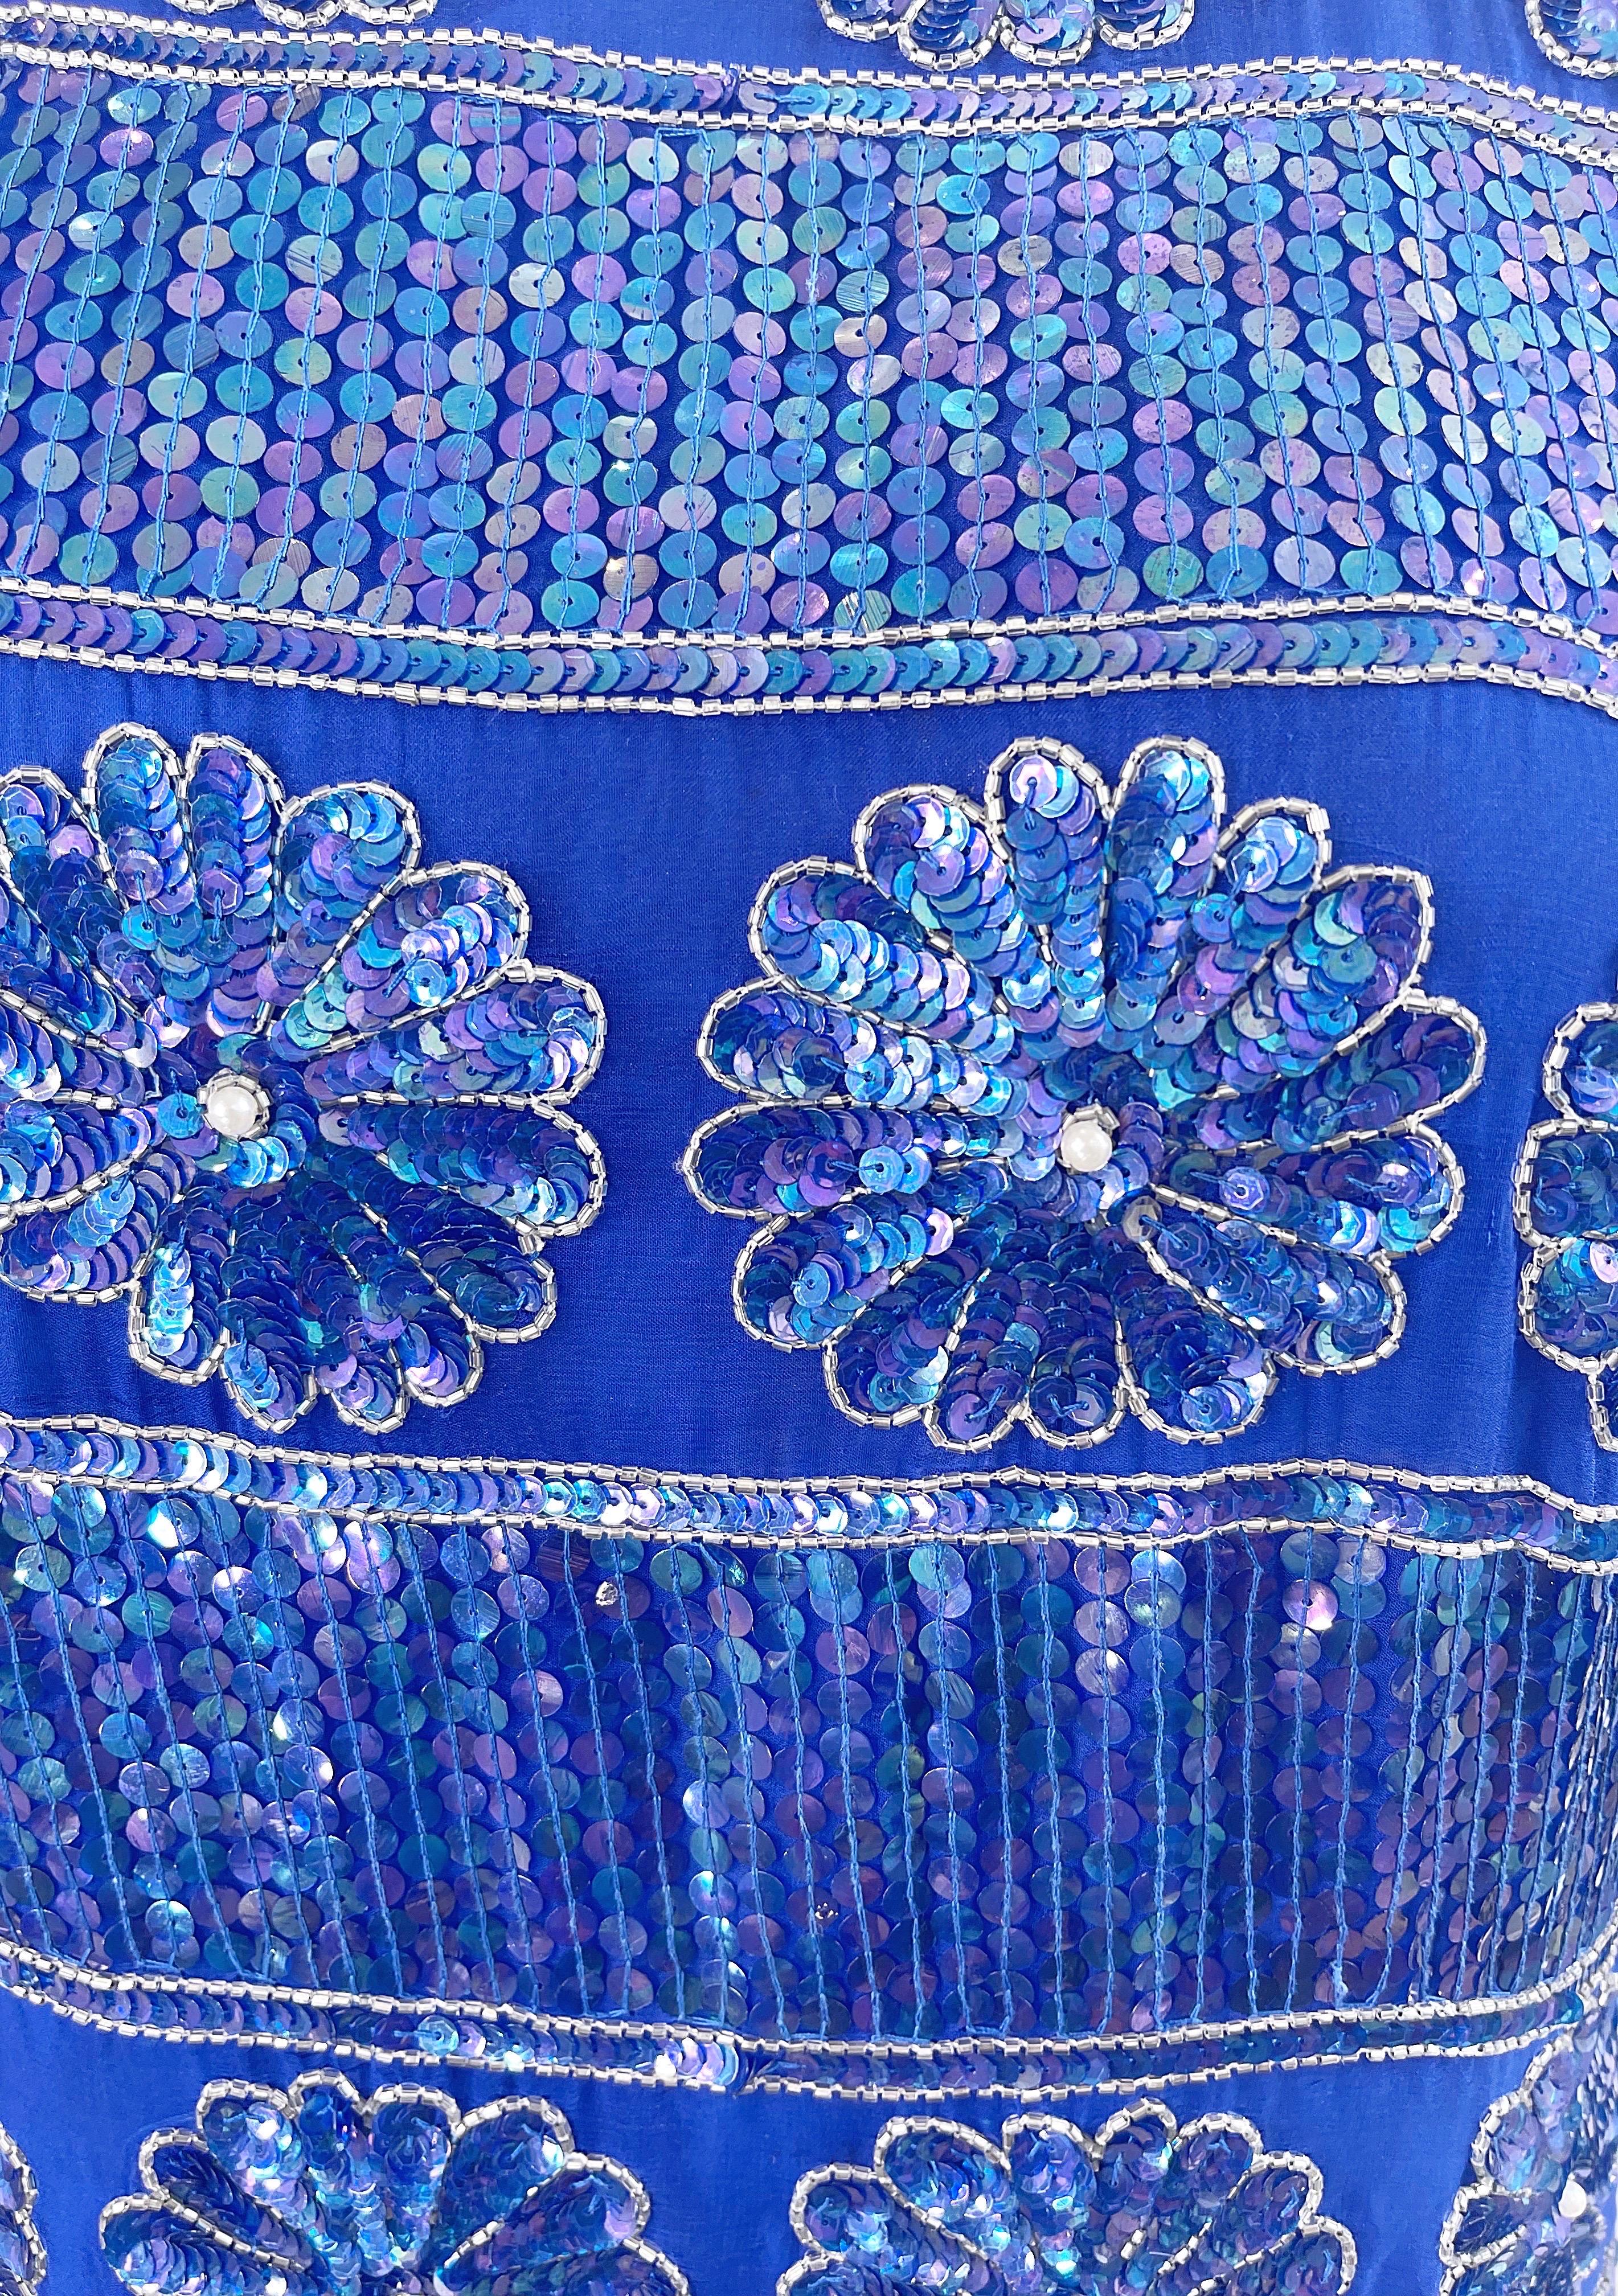 1980s Royal Blue Silk Chiffon Sequin Beaded Pearl Vintage 80s Blouse Shirt Top In Excellent Condition For Sale In San Diego, CA